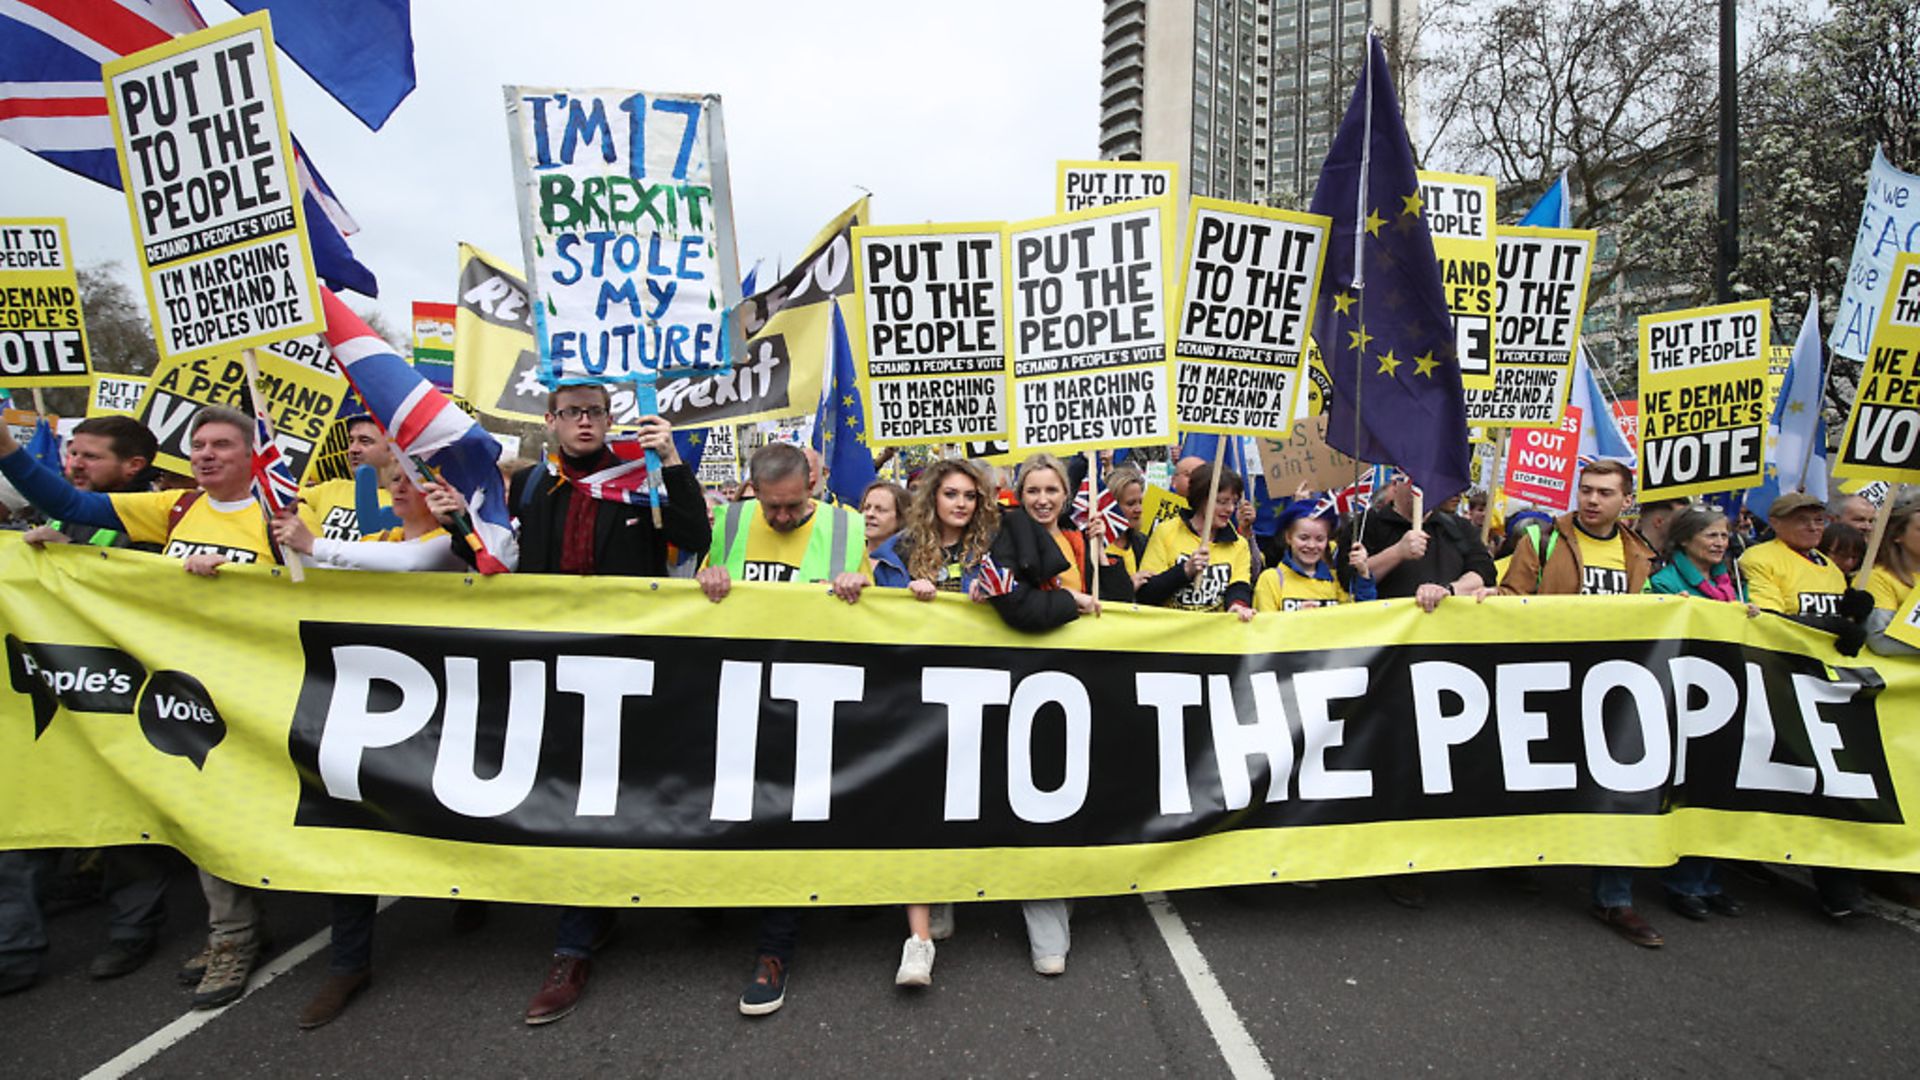 Anti-Brexit campaigners take part in the People's Vote March in London. (Yui Mok/PA) - Credit: PA Wire/PA Images